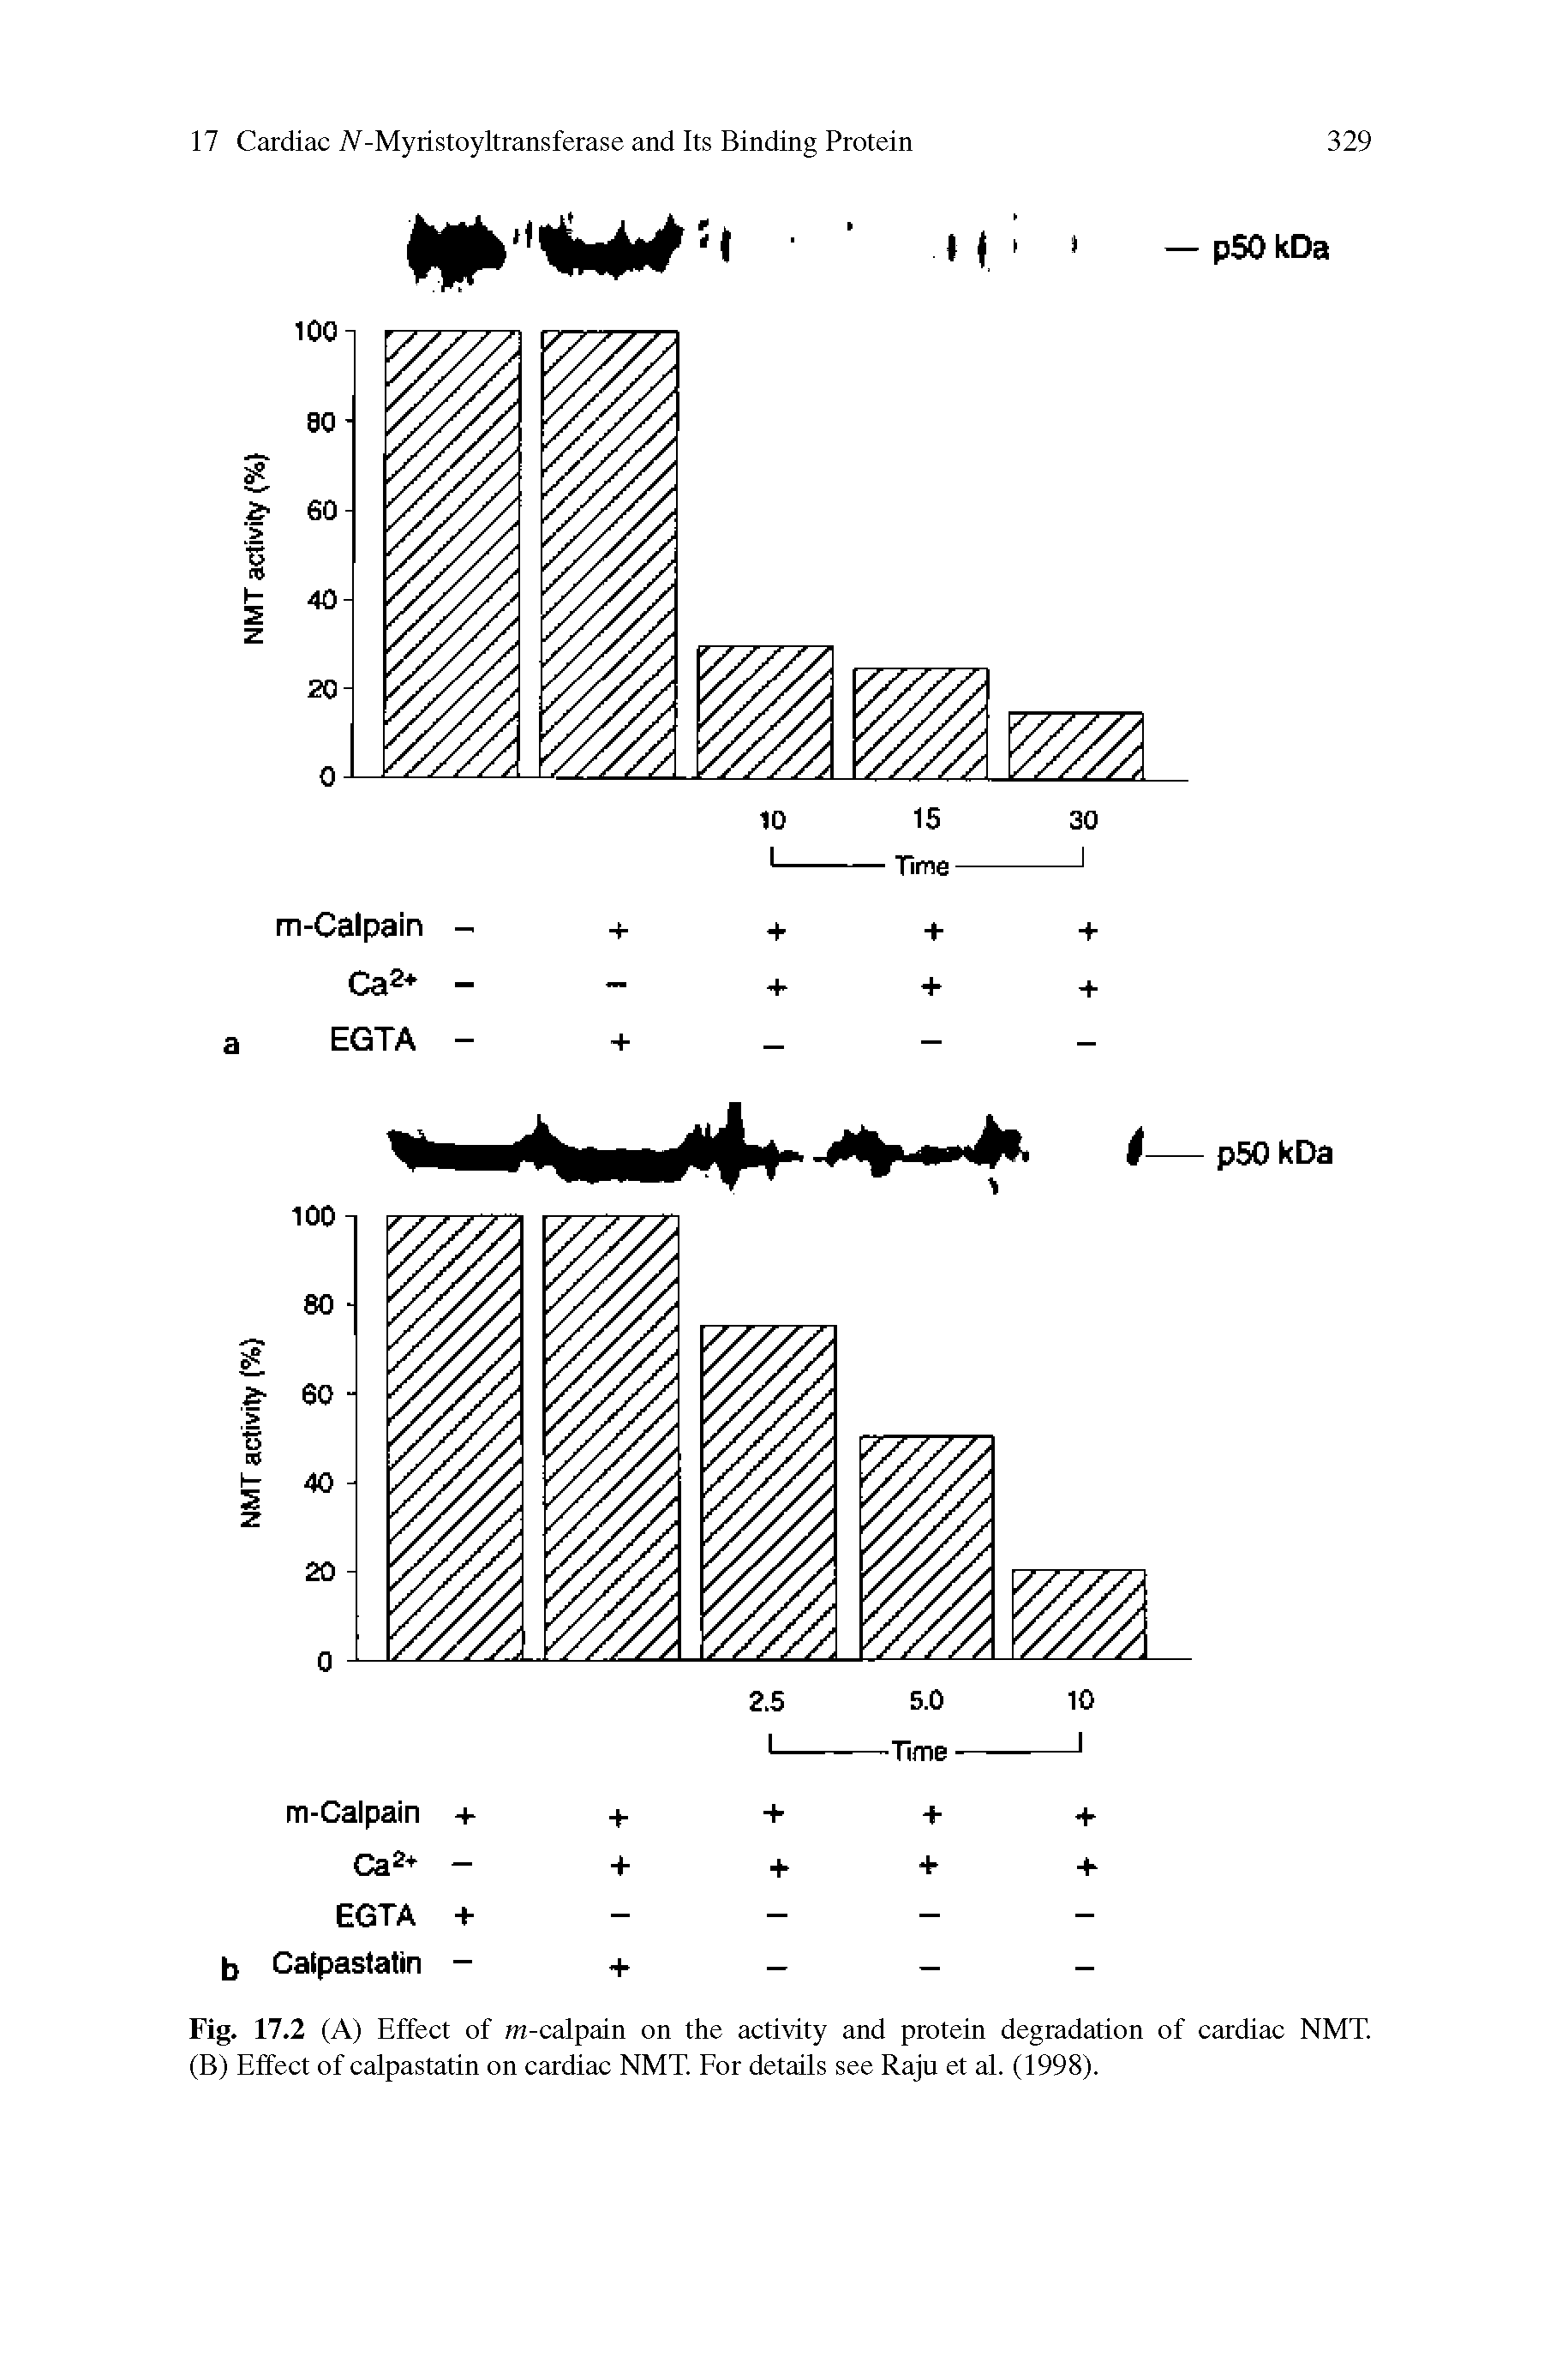 Fig. 17.2 (A) Effect of m-calpain on the activity and protein degradation of cardiac NMT. (B) Effect of calpastatin on cardiac NMT. For details see Raju et al. (1998).